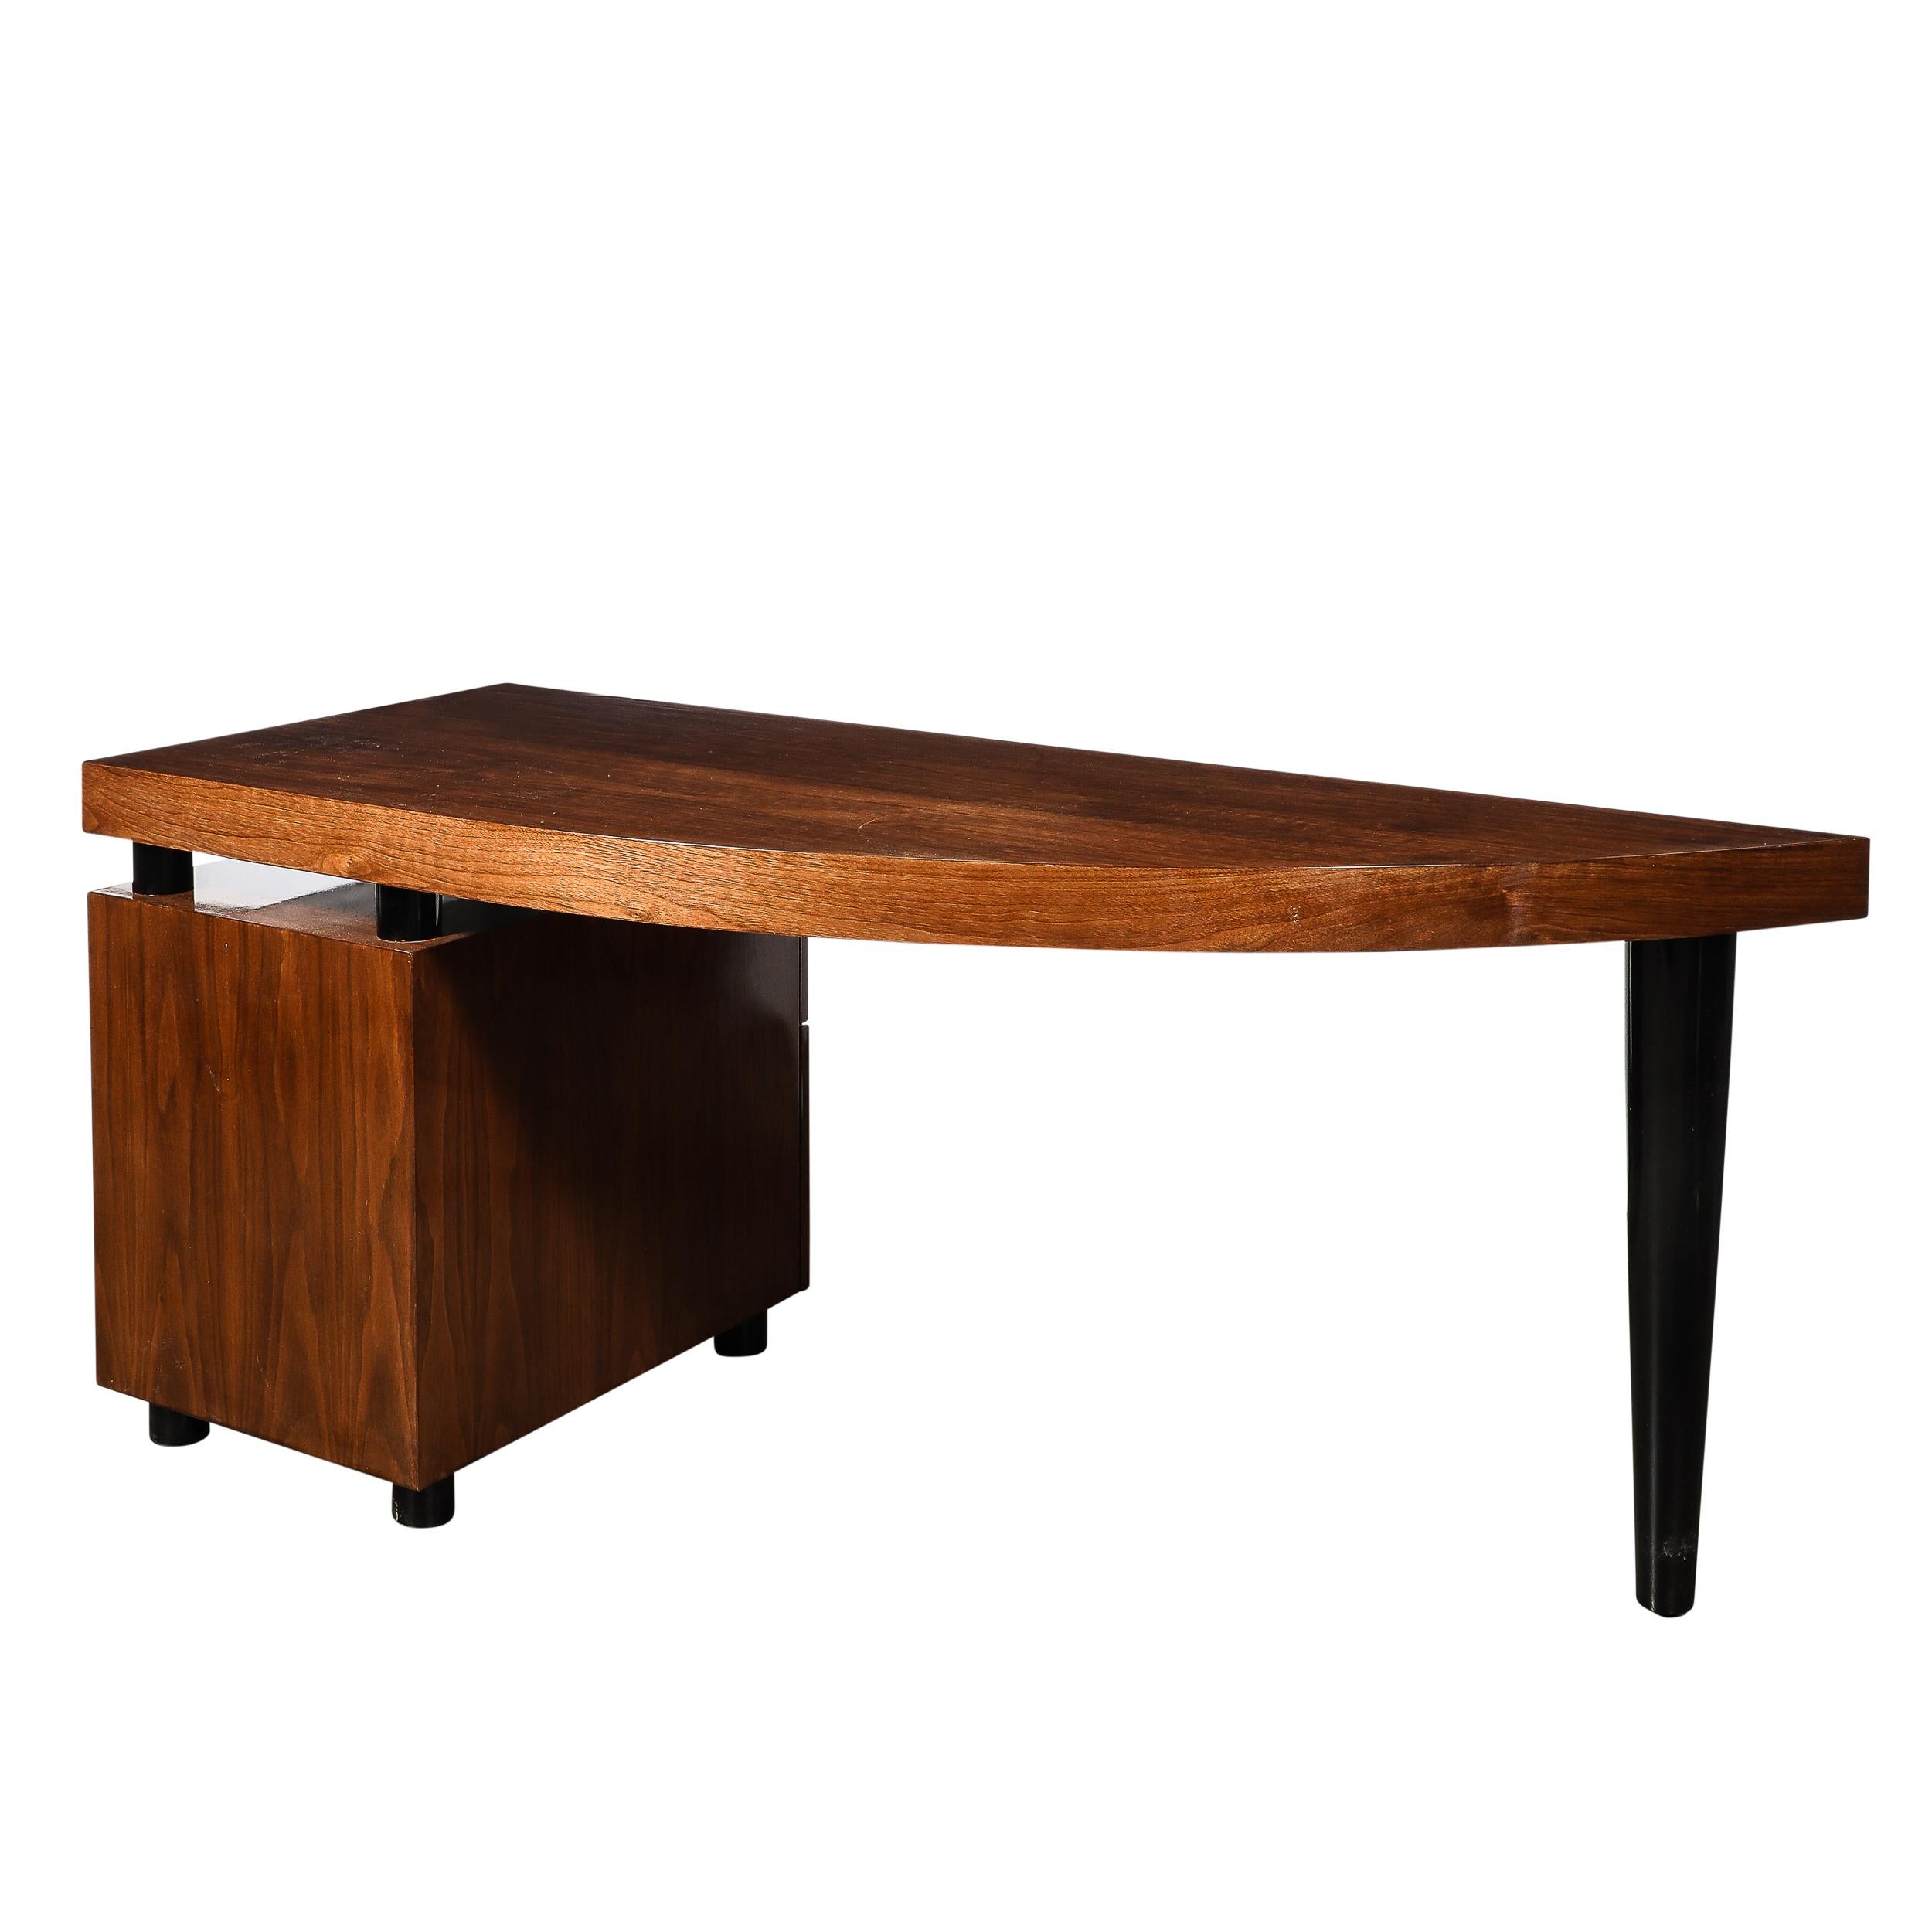 This unique and brilliantly proportioned Mid-Century Modernist Boca Desk in Bookmatched Walnut W/ Tapered Black Lacquer Support is by Leon Rosen for Pace and originates from the United States Circa 1980. Formed in a lovely hue of bookmatched walnut